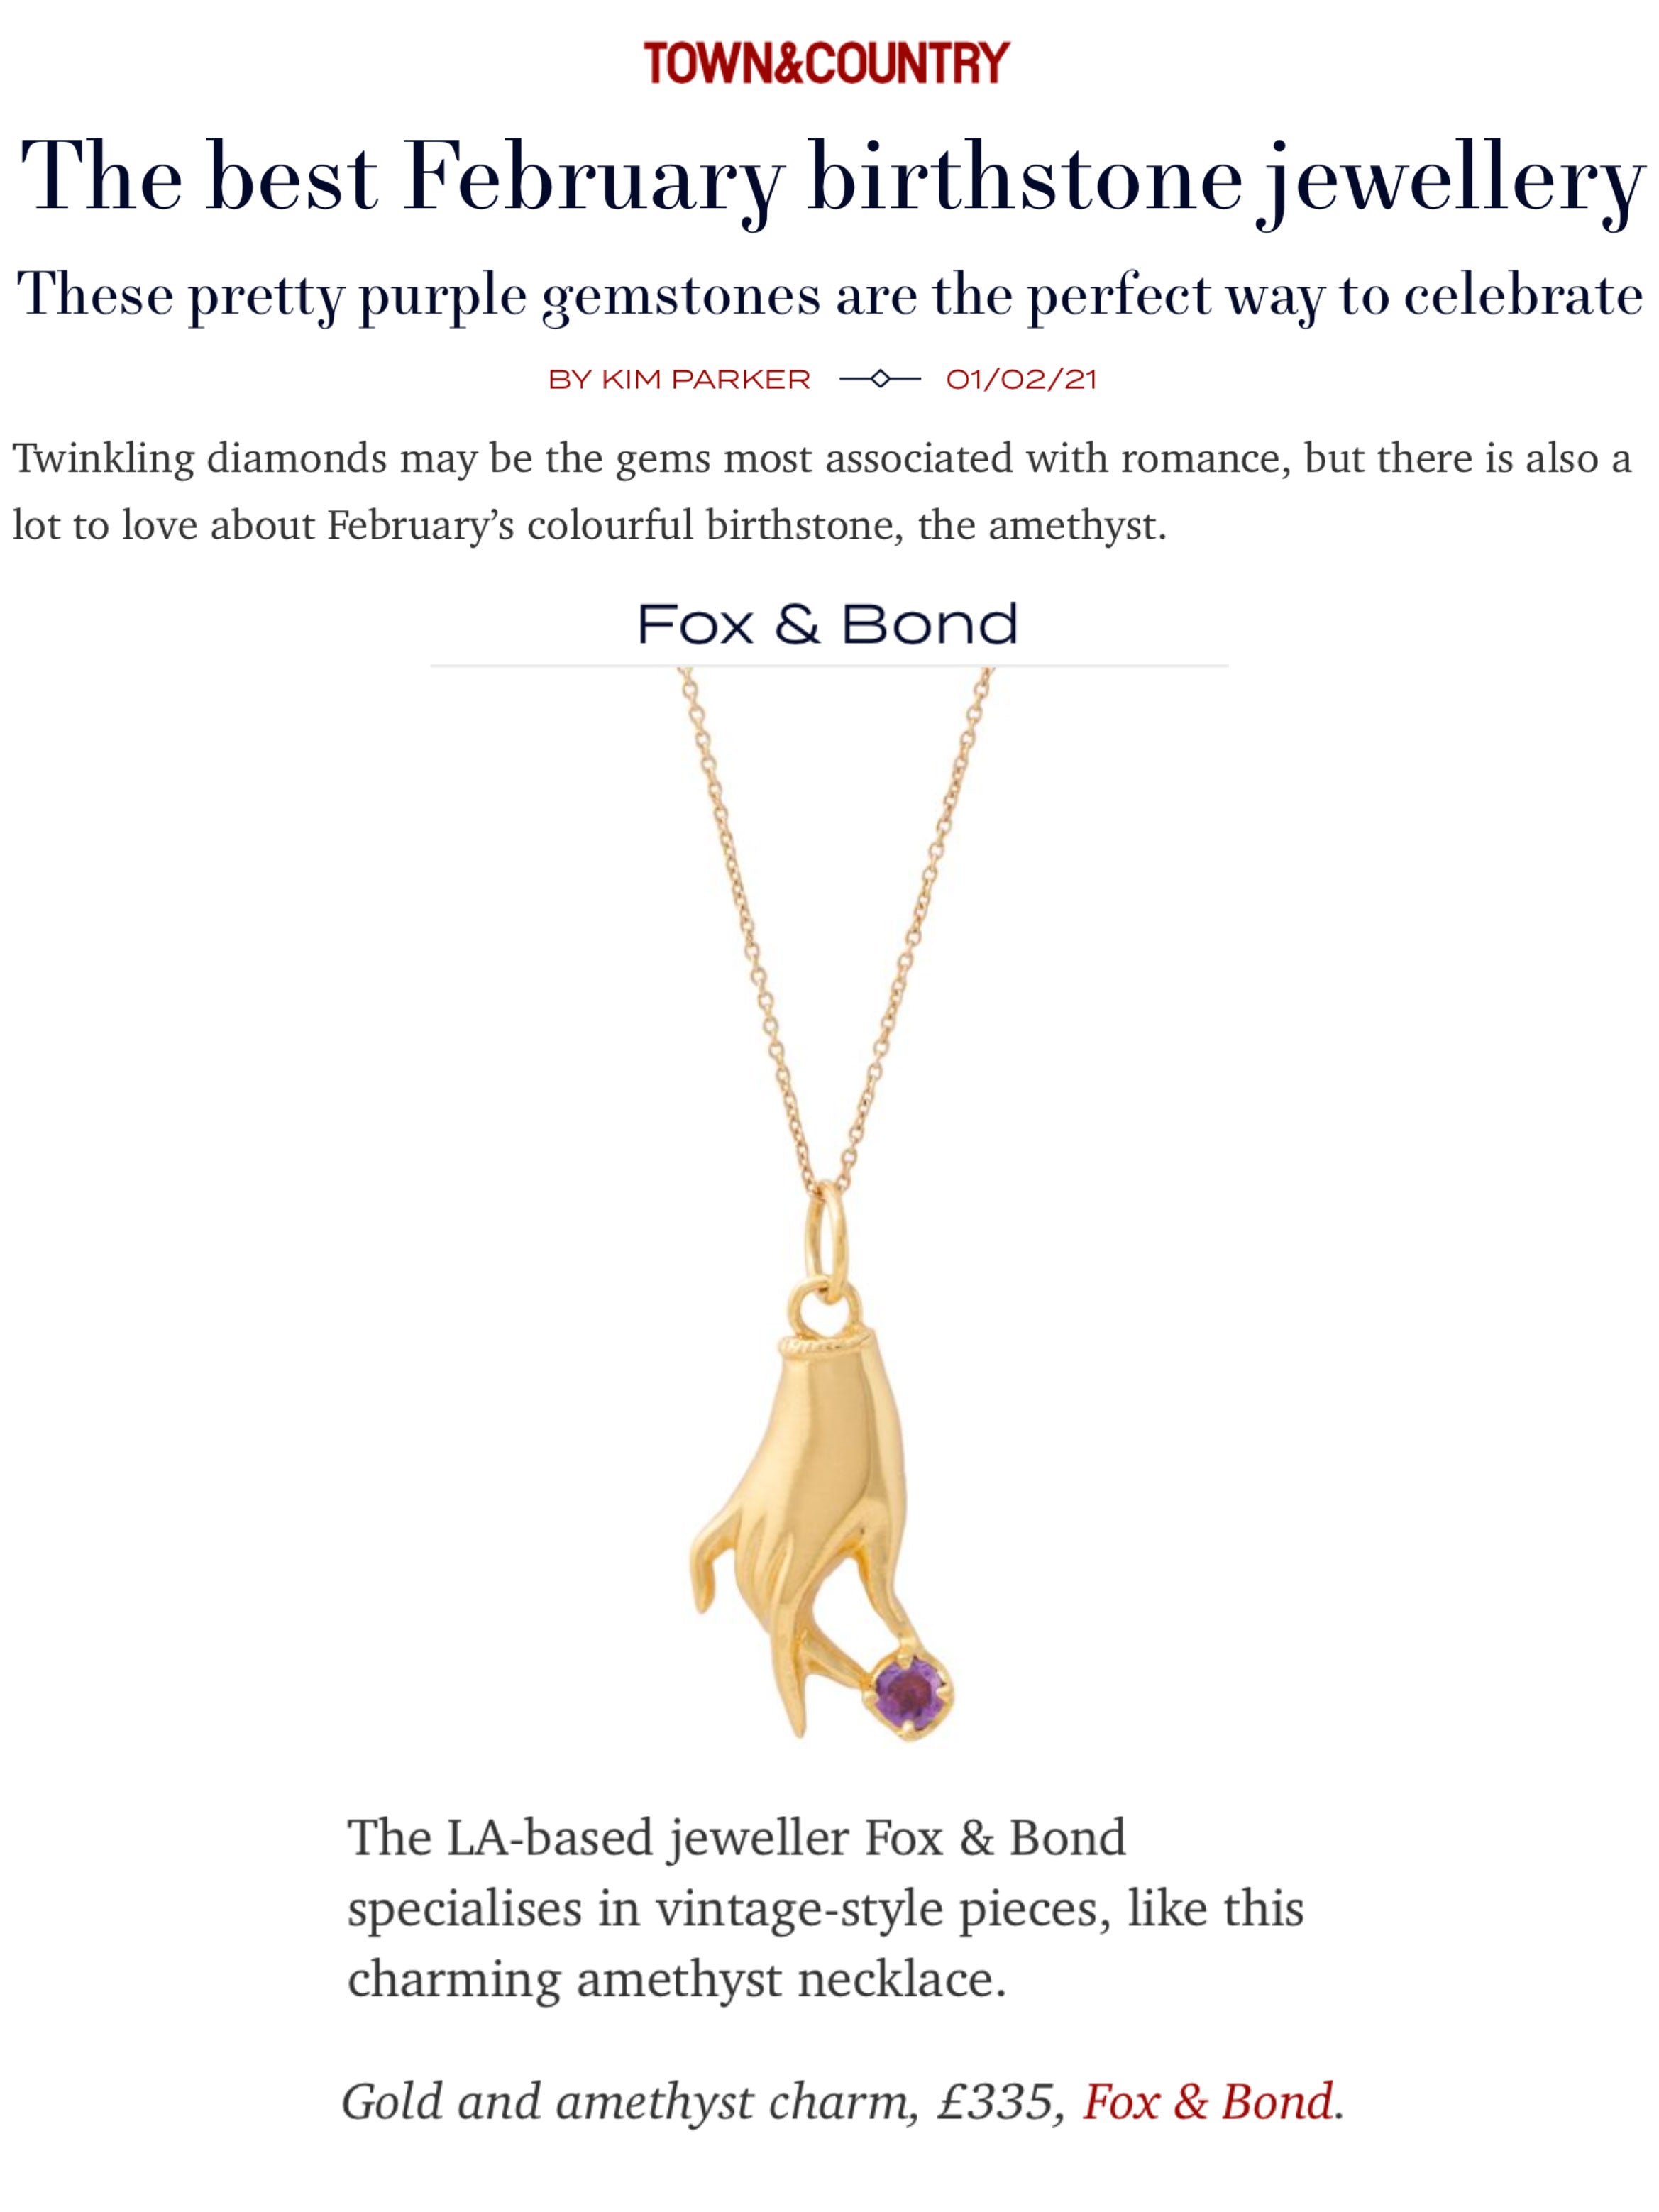 Town & Country UK: The best February birthstone jewellery